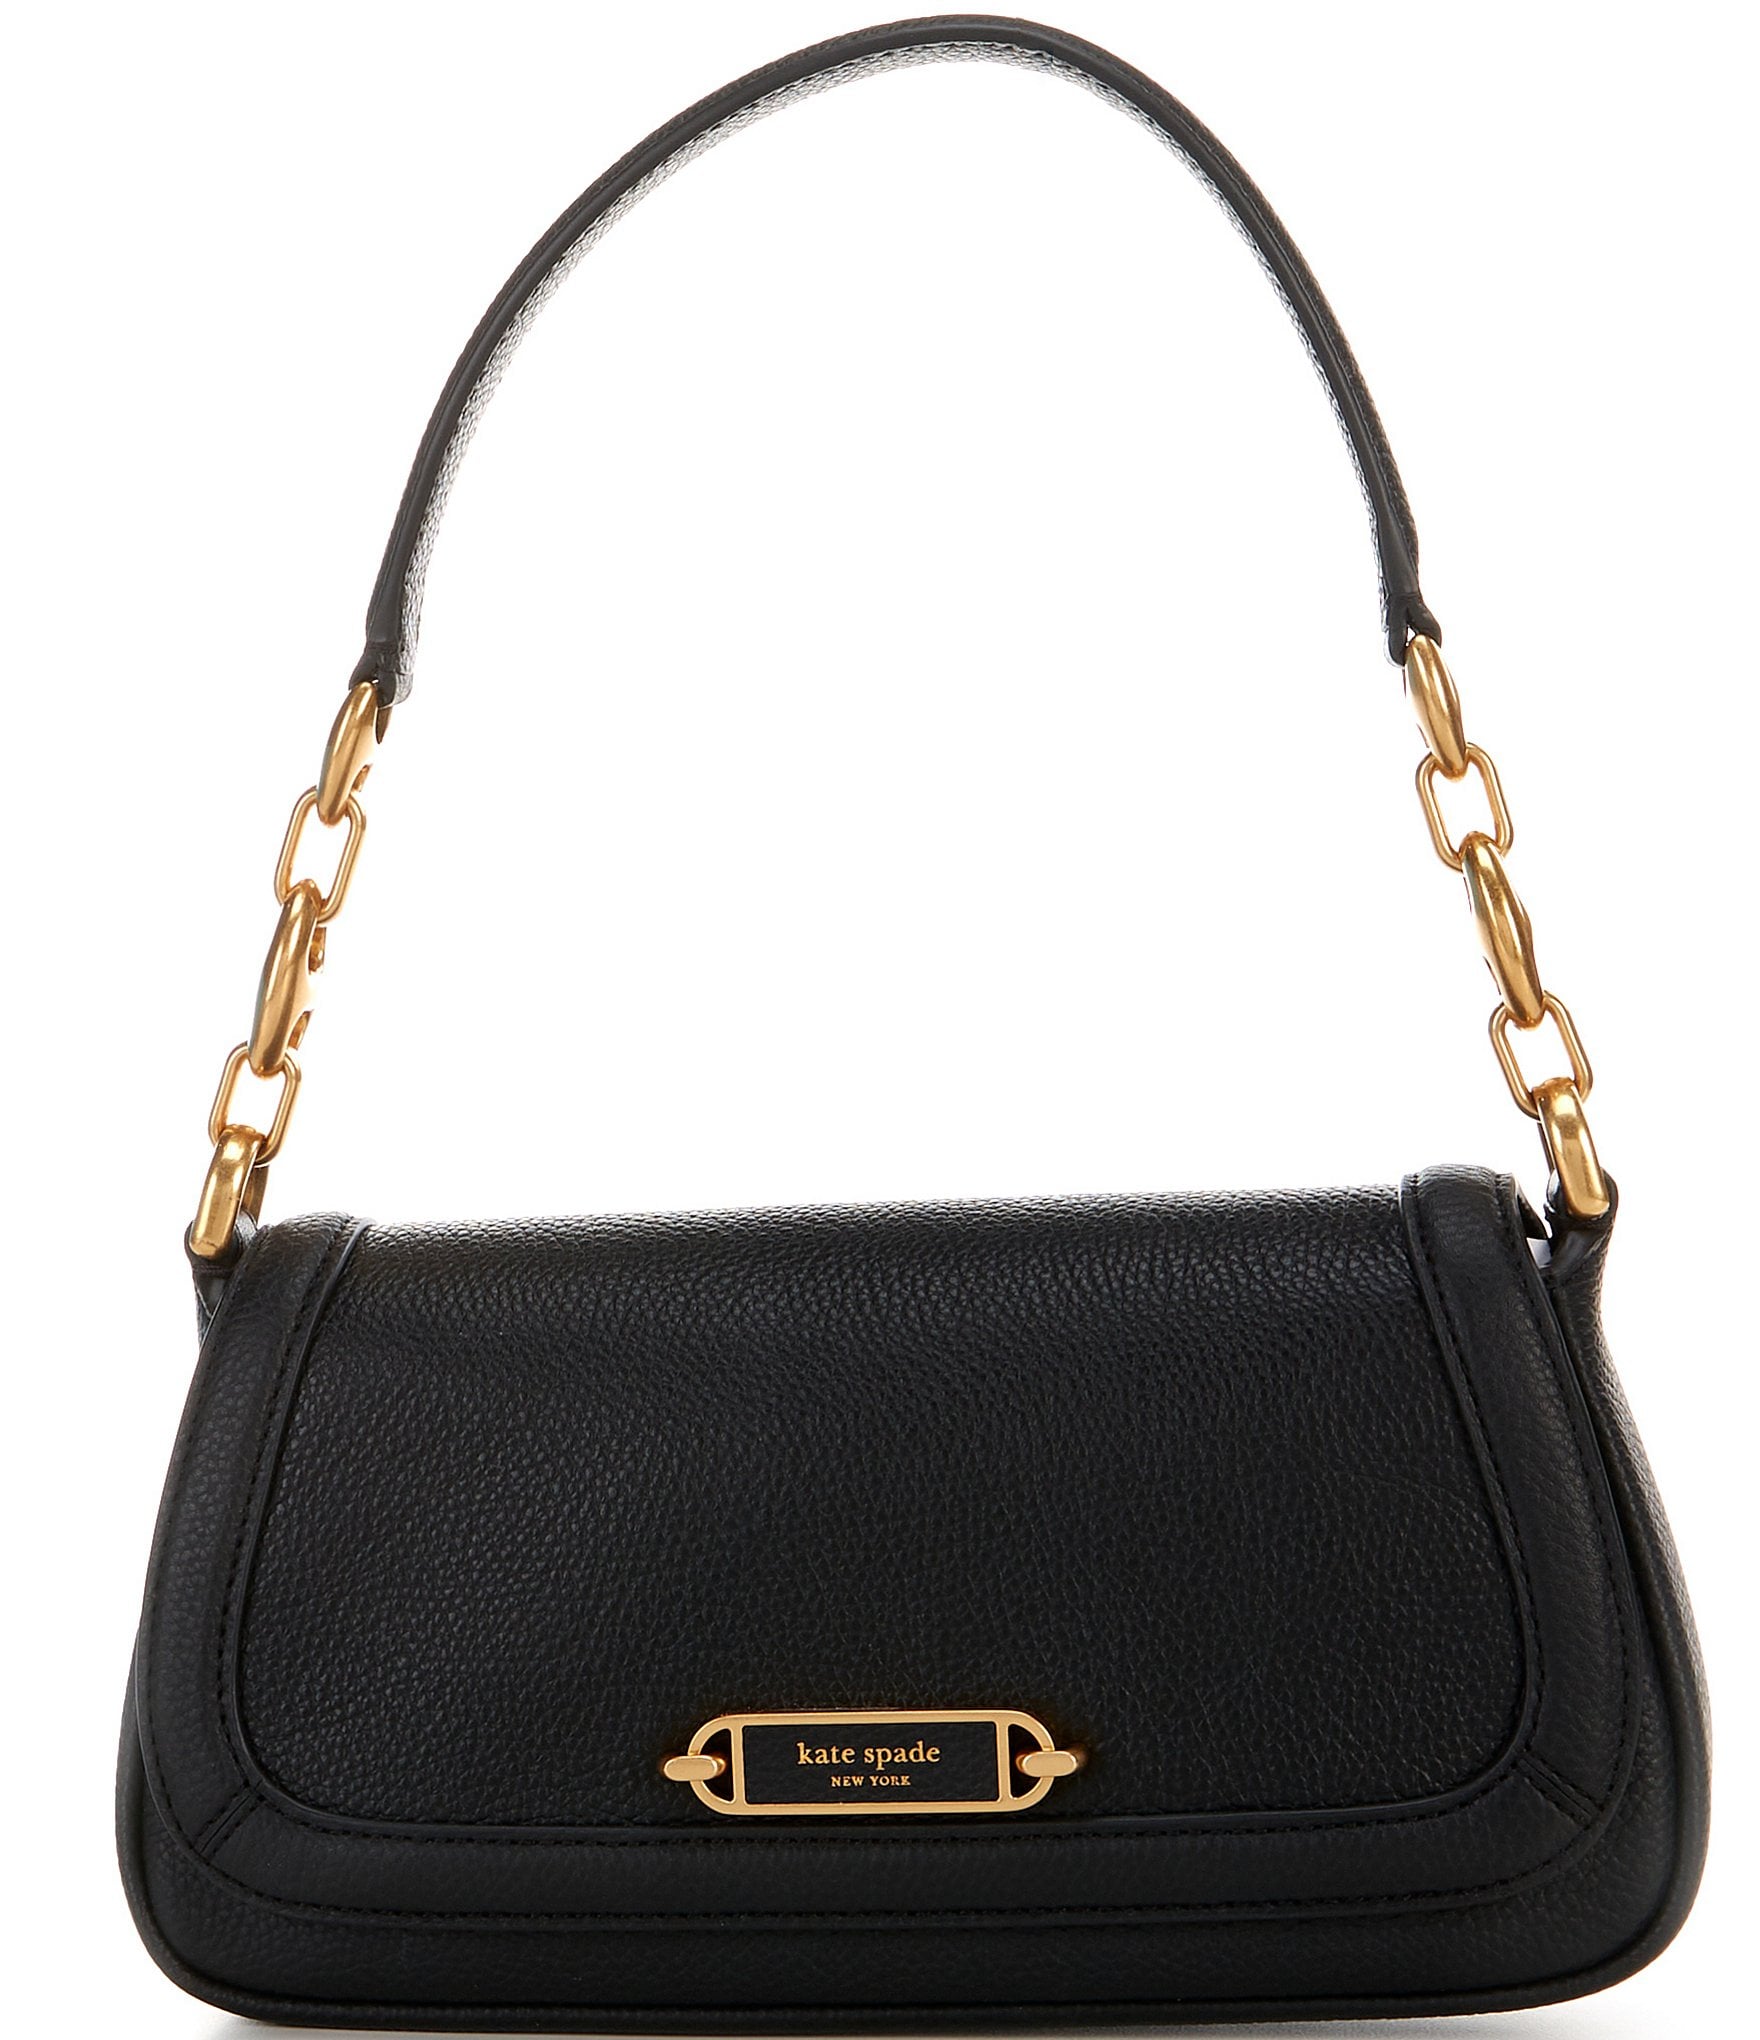 kate spade new york Gramercy Pebbled Leather Small Flap Shoulder Bag ...